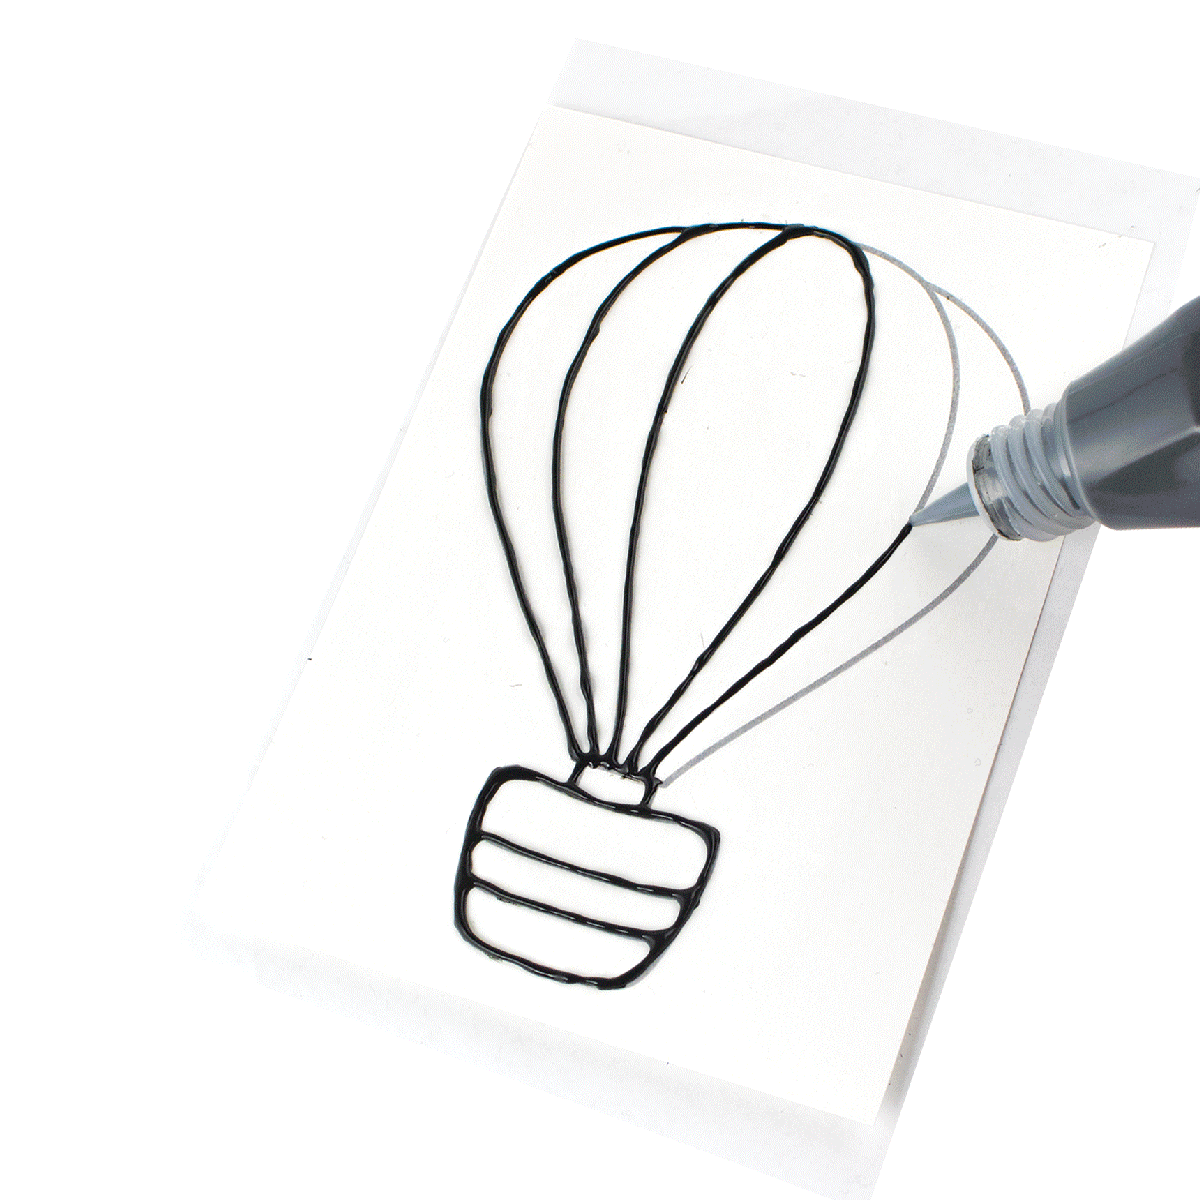 Animation of making hot air balloon with Creatibles Cling Art Kit